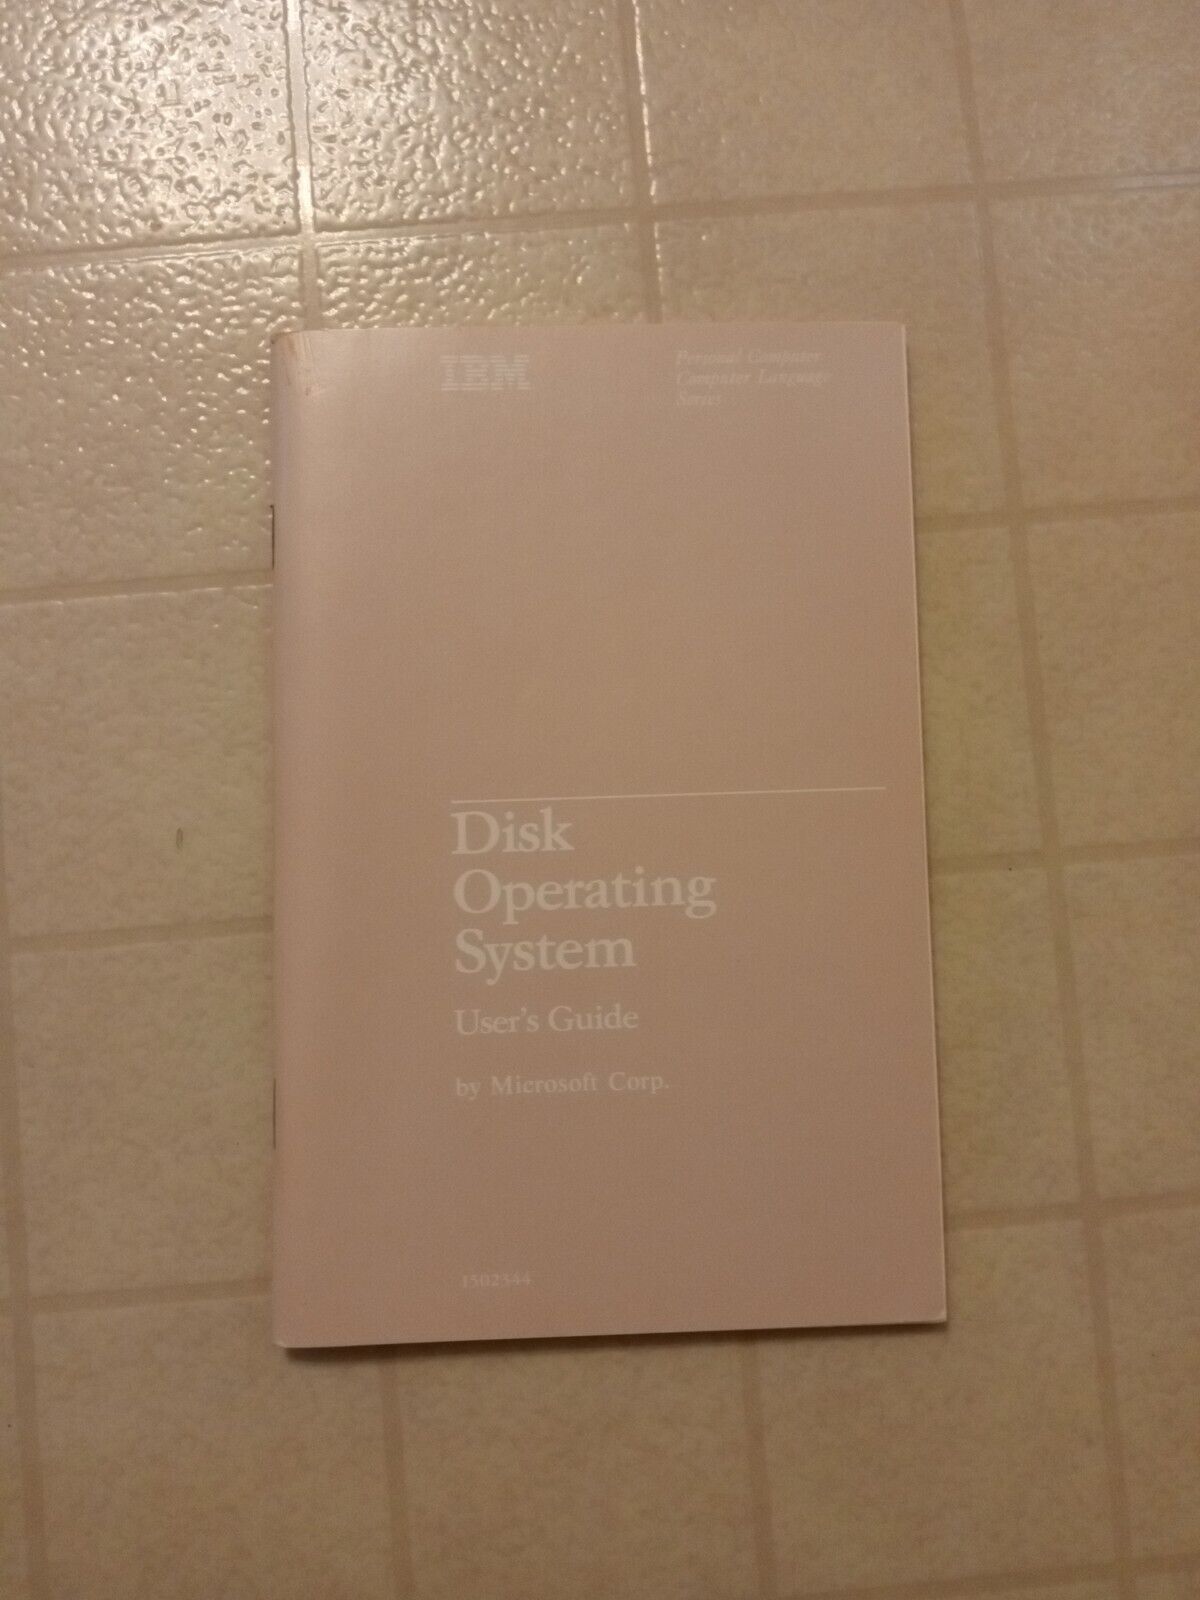 Vintage 1983 IBM Disk Operating System Users Guide RARE